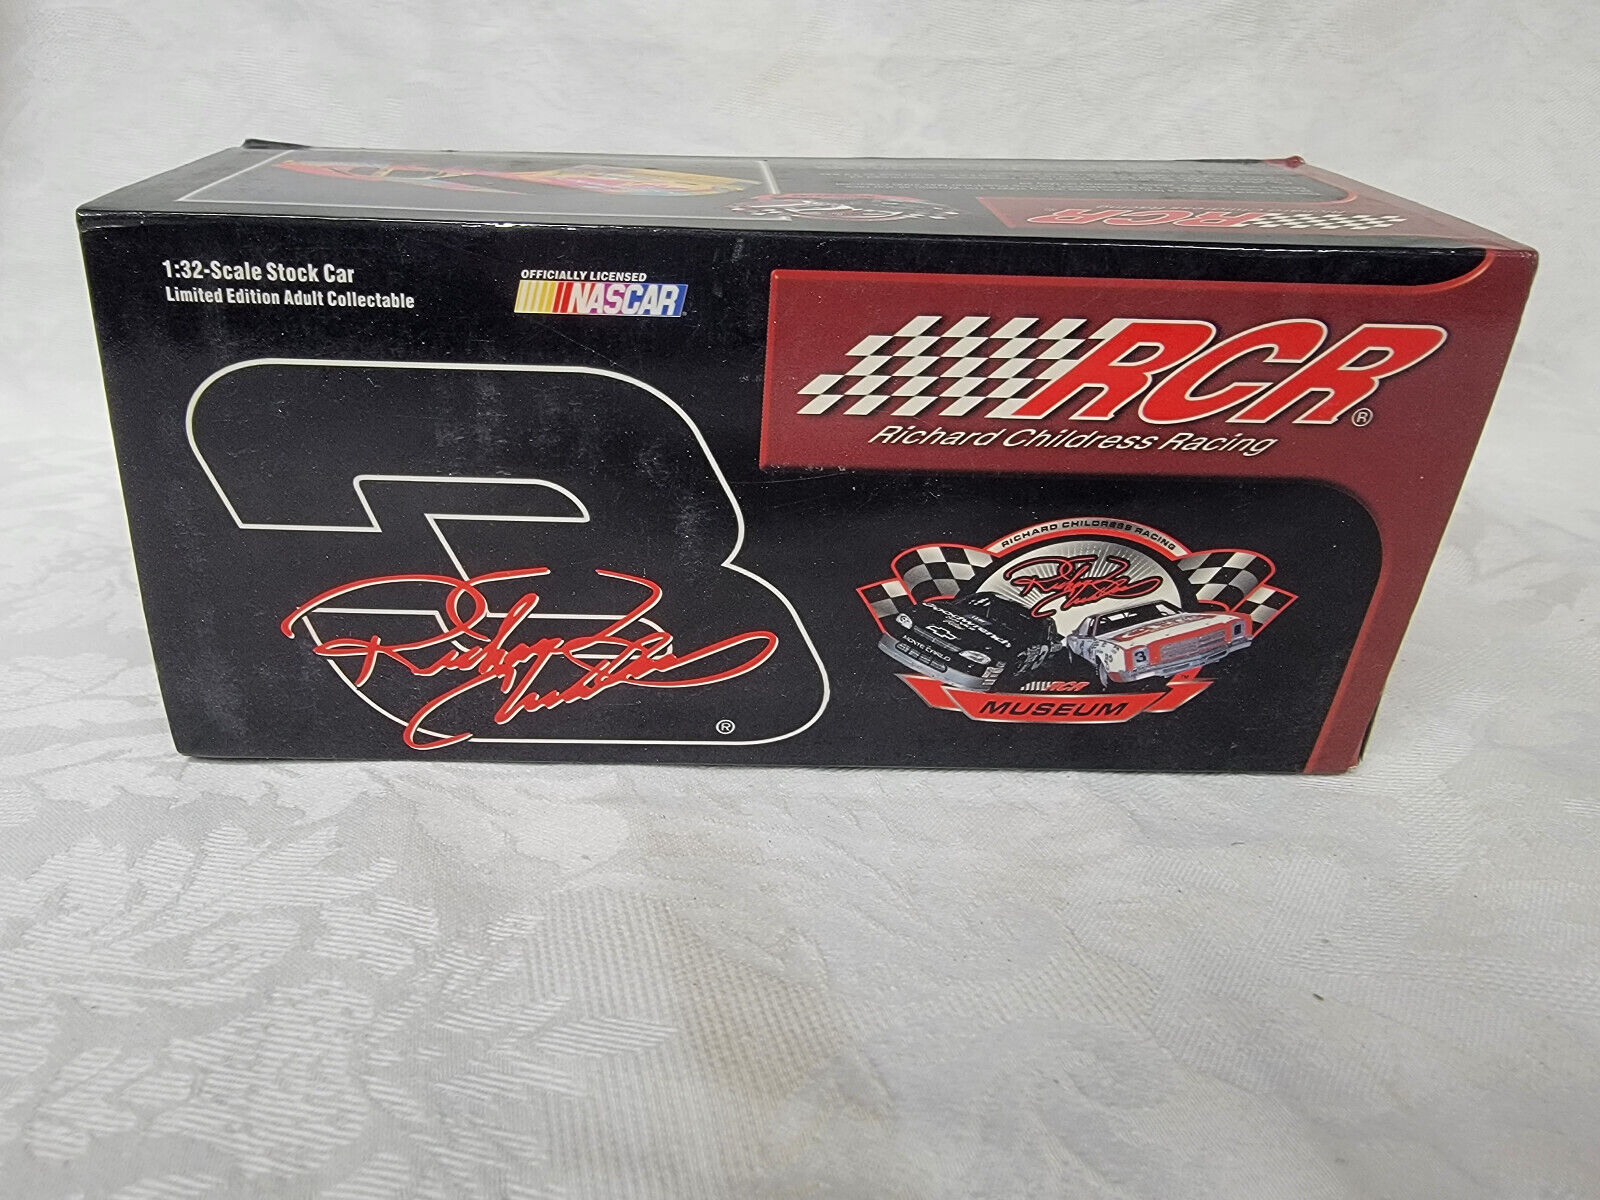  Richard Childress Racing Peter Max NASCAR Dale Earnhardt Dicast 1:32